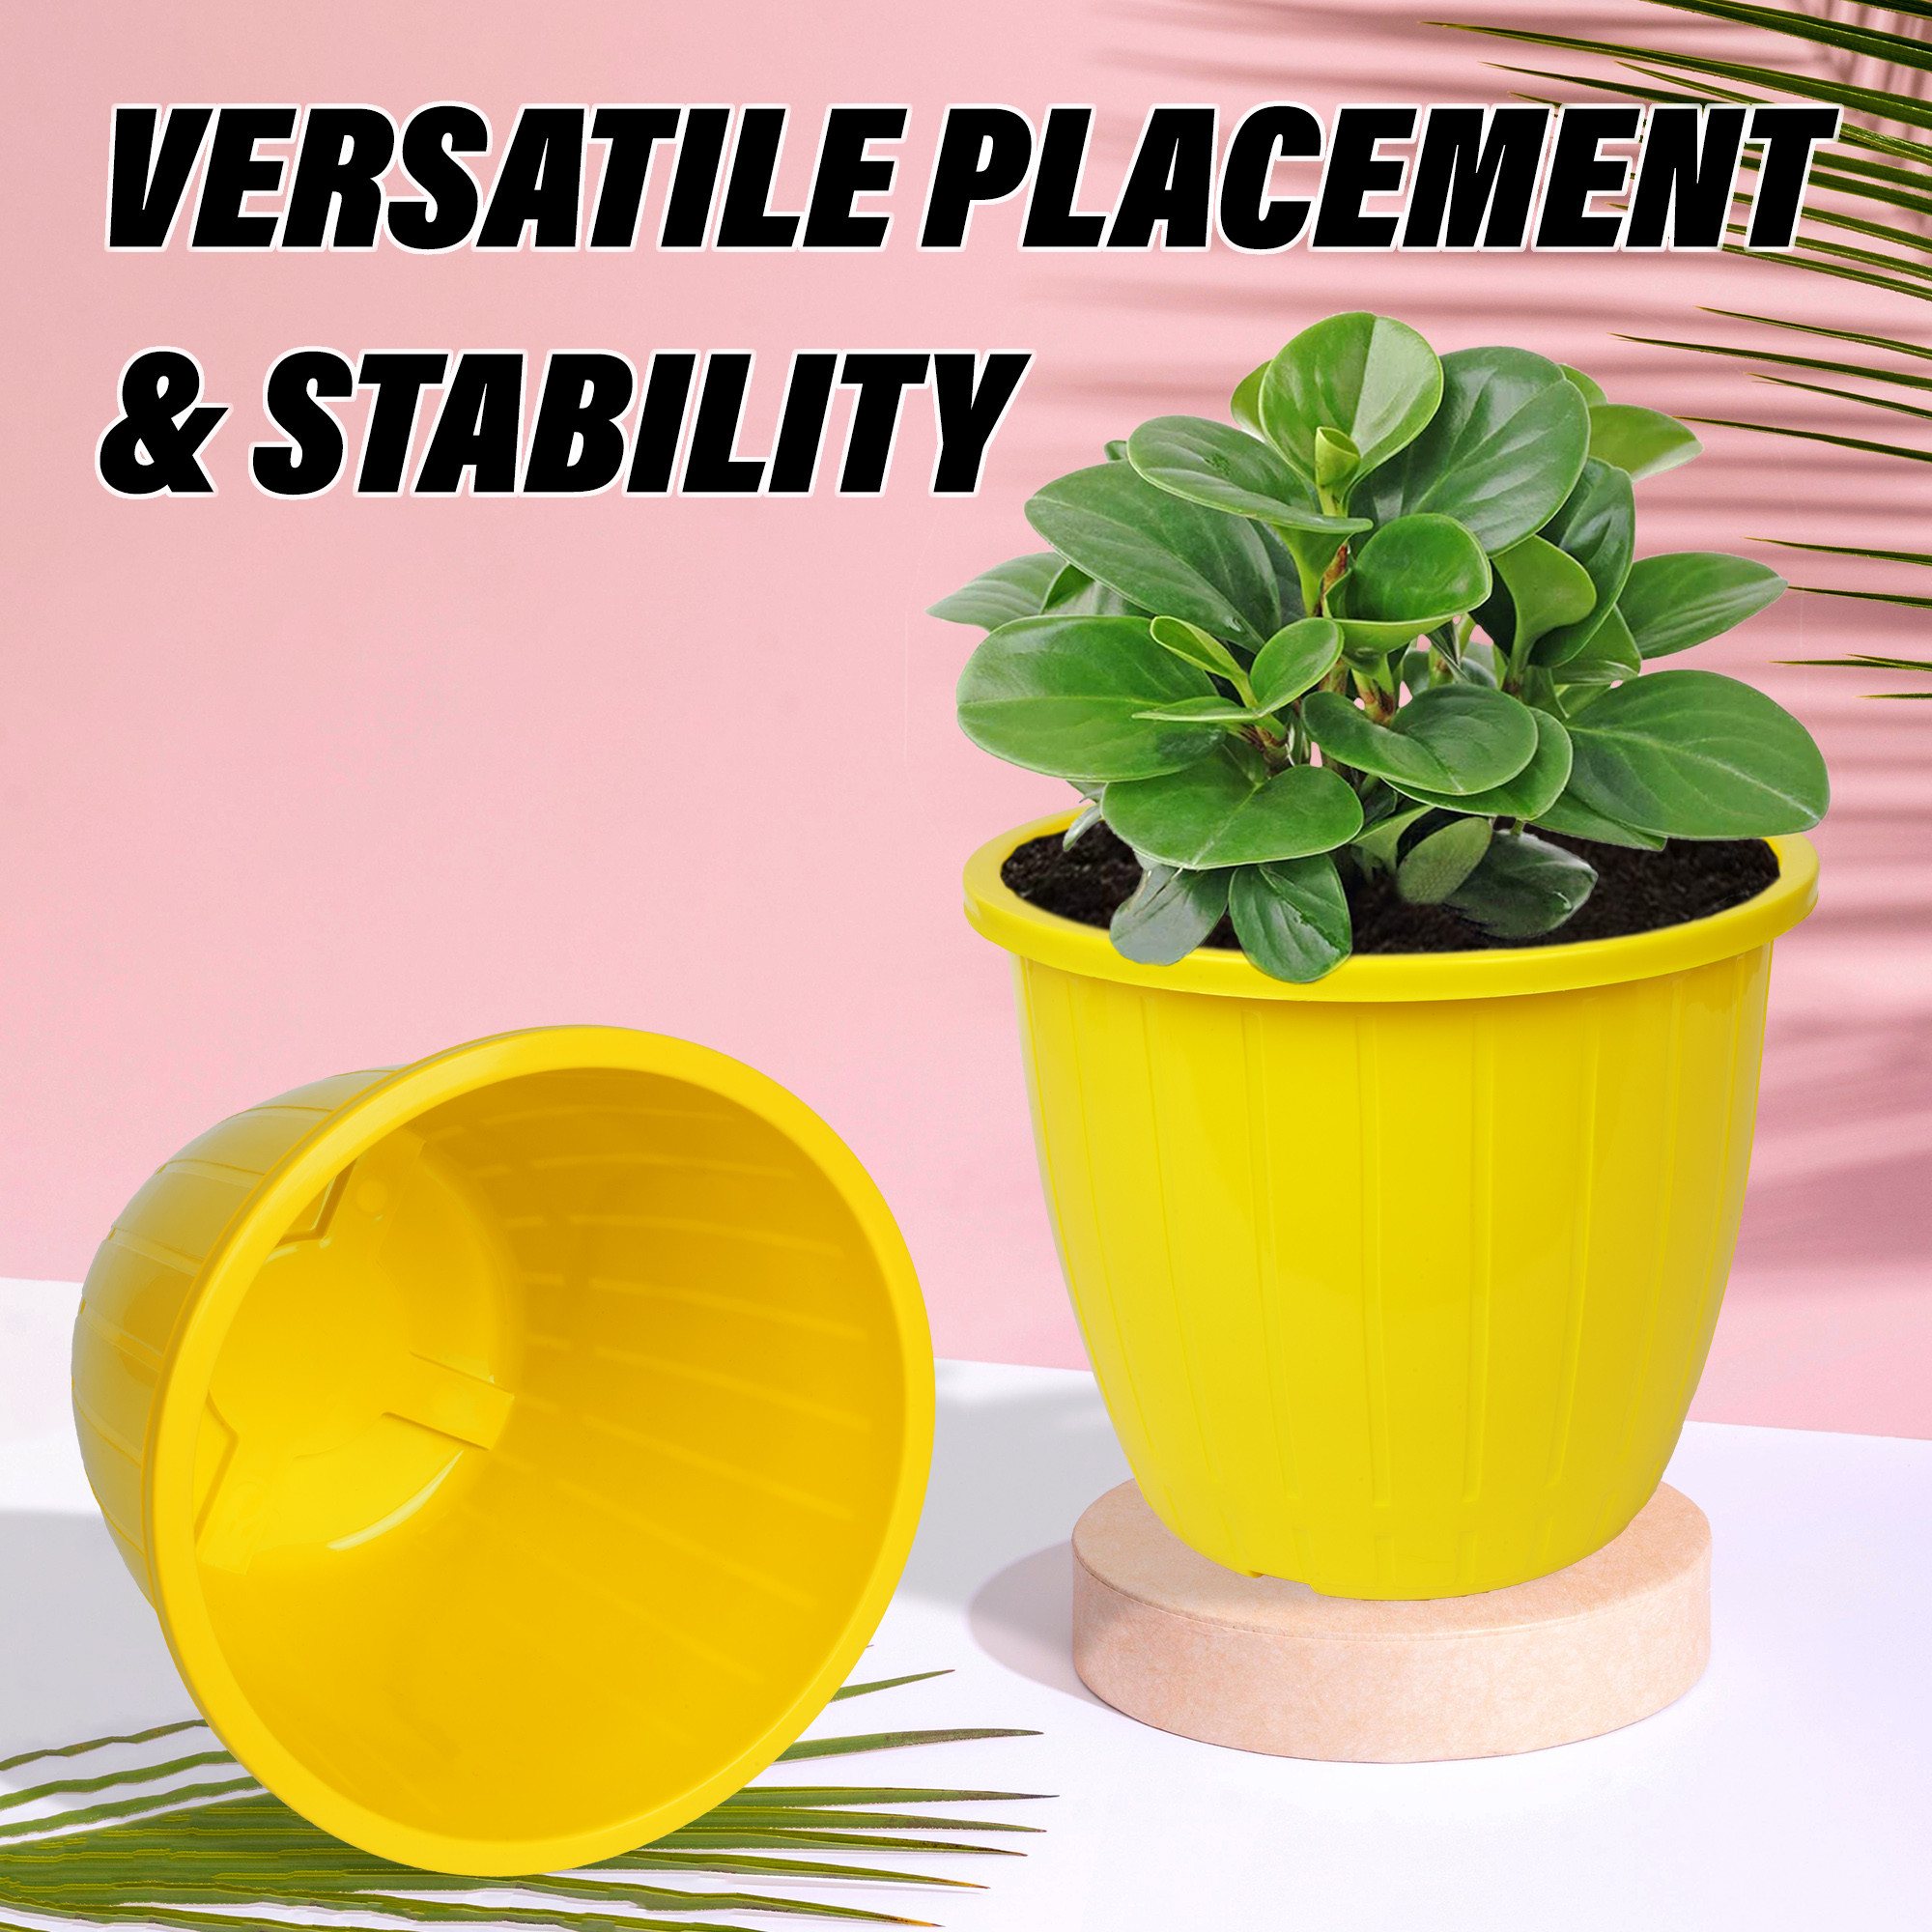 Kuber Industries Flower Pot | Flower Pots for Indoor & Outdoor | Plastic Pot for Gardening | Planter for Flower | Balcony Flower Pot with Drain Holes | Duro Flower Pot | 6 Inch |Yellow